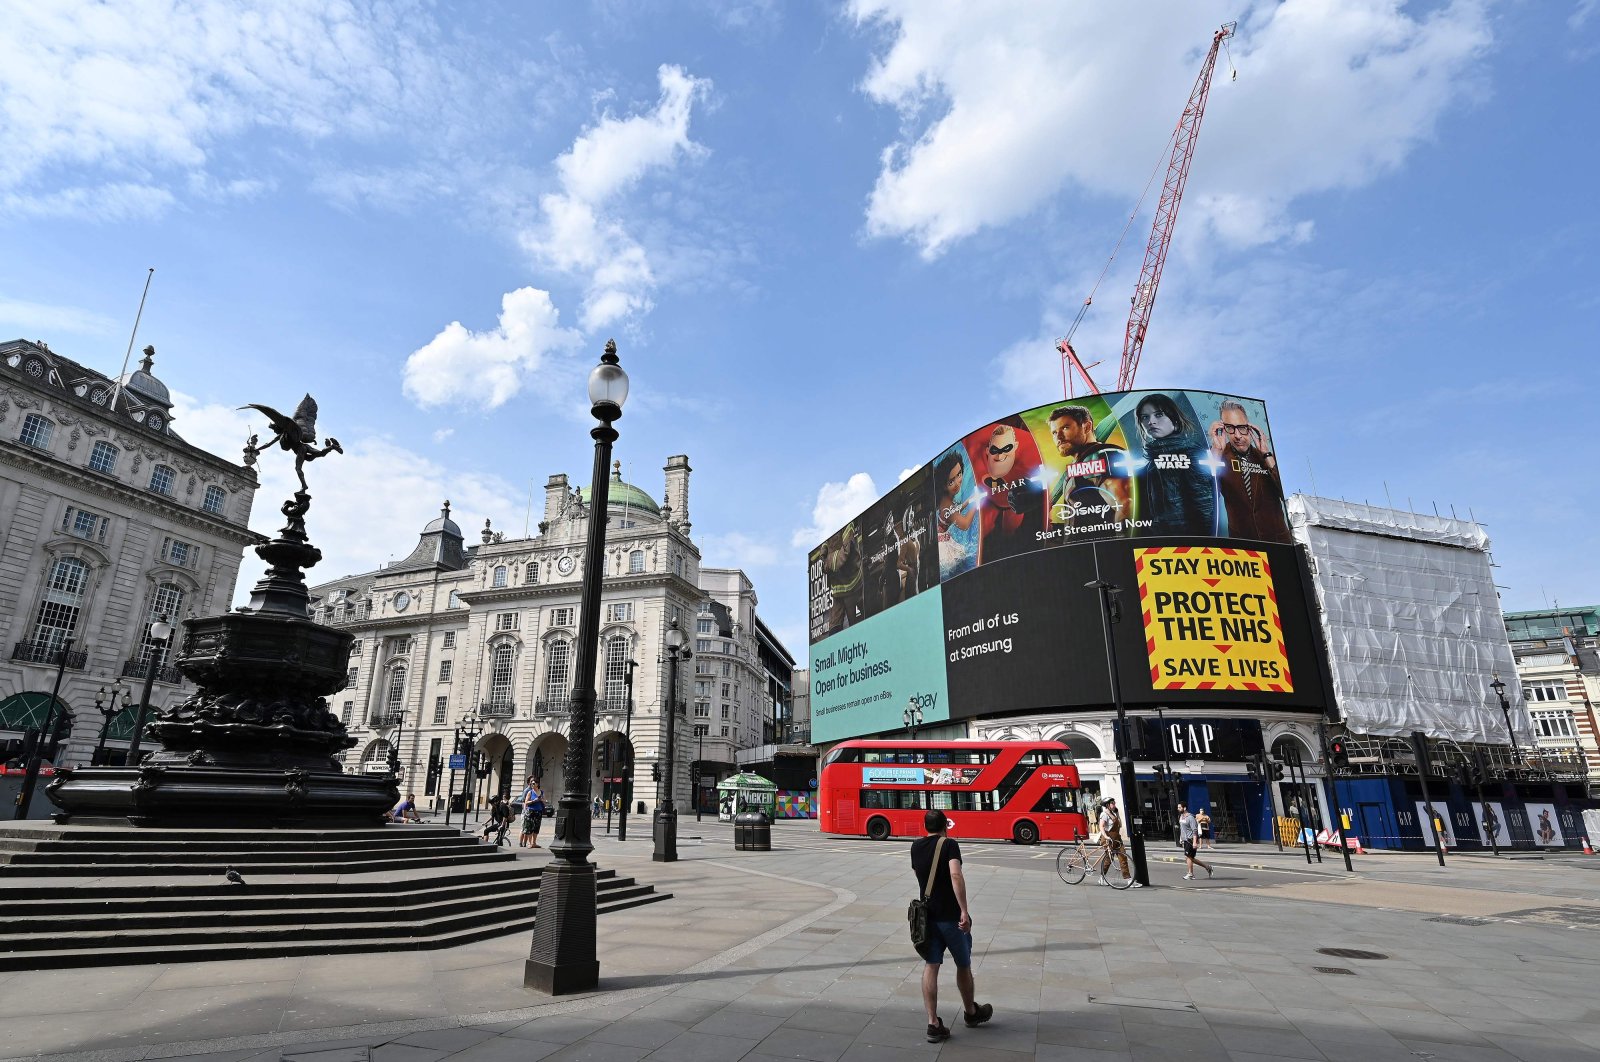 The electronic billboard in Piccadilly Circus displays a notice telling people to "Stay Home. Protect the NHS. Save Lives." near the empty Shaftesbury Memorial Fountain, London, April 12, 2020. (AFP Photo)